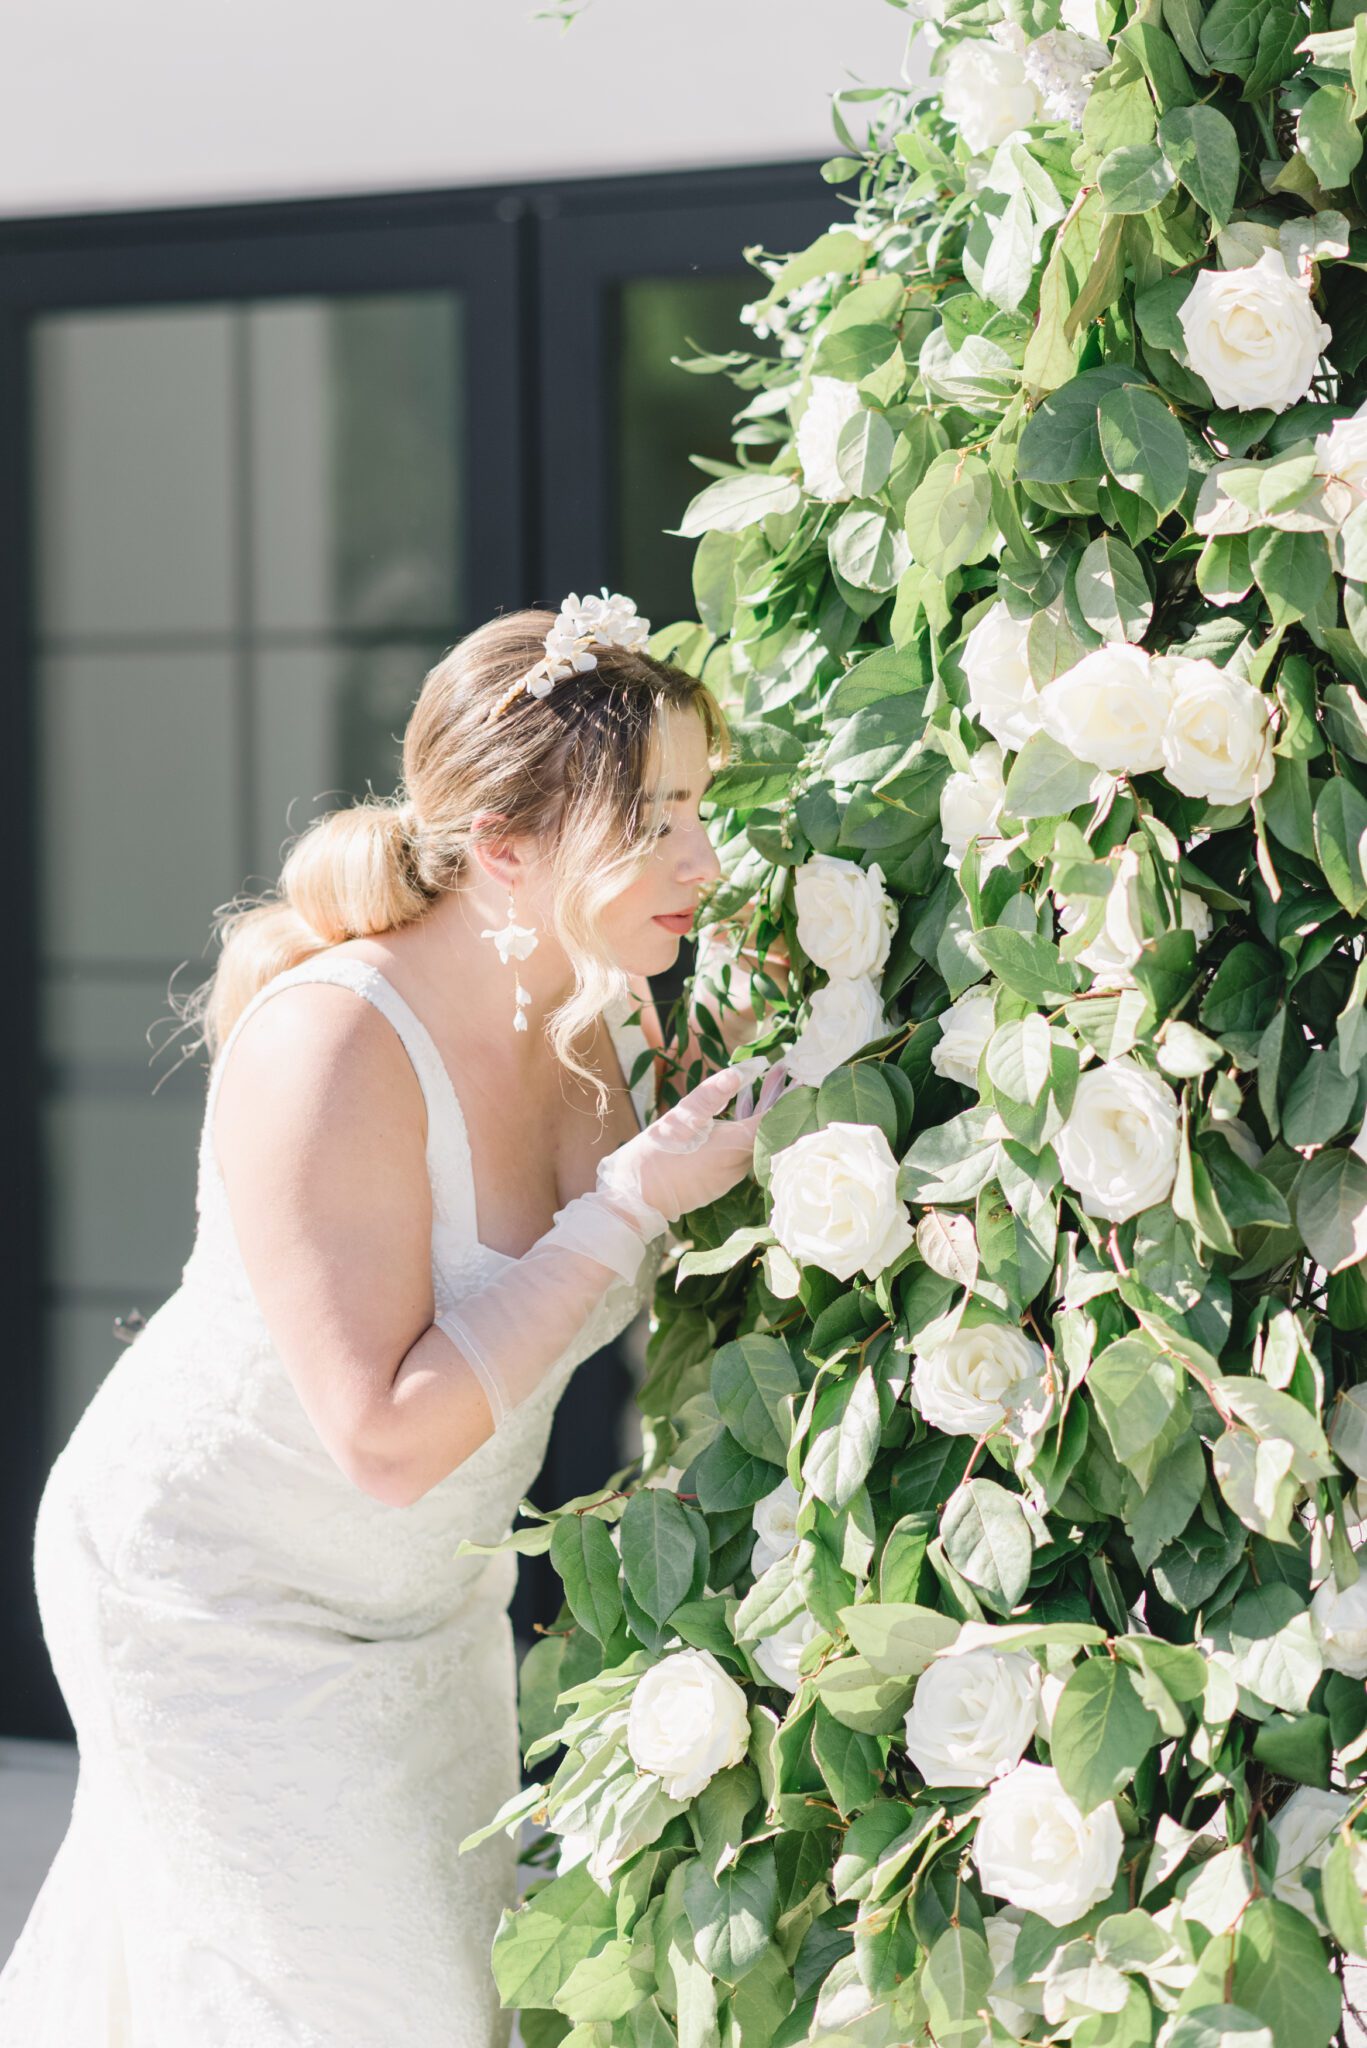 Bride standing in front of lush ivory, white and greenery floral installation wearing sophisticated yet whimsical bridal gown and jewelry. Outdoor summer wedding inspiration.